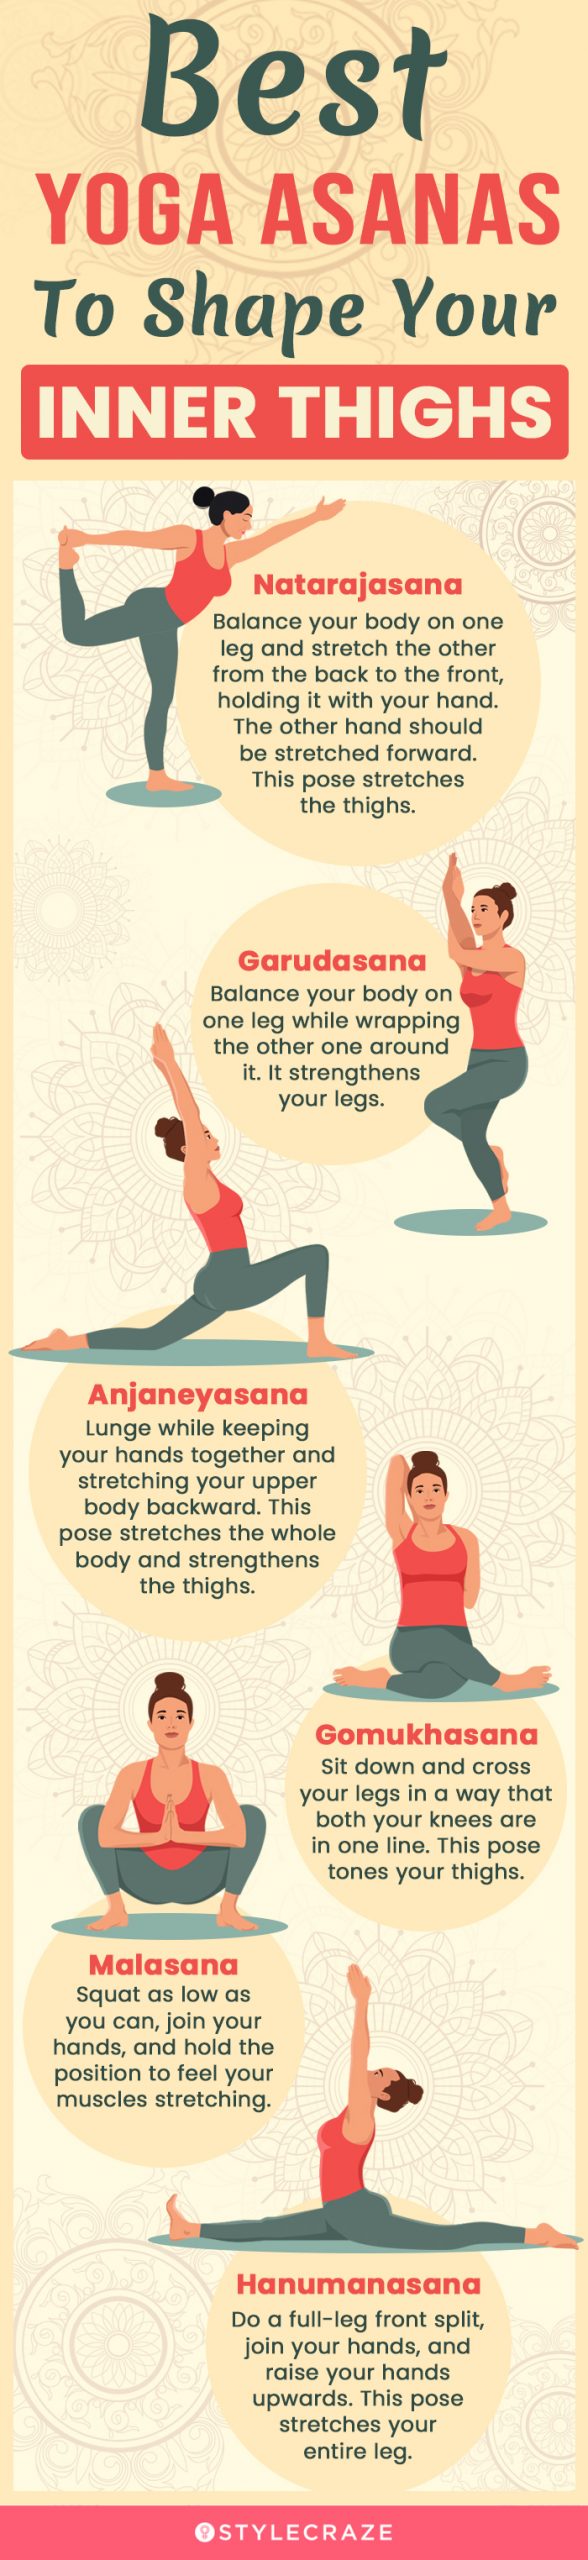 best yoga asanas to shape your inner thighs (infographic)